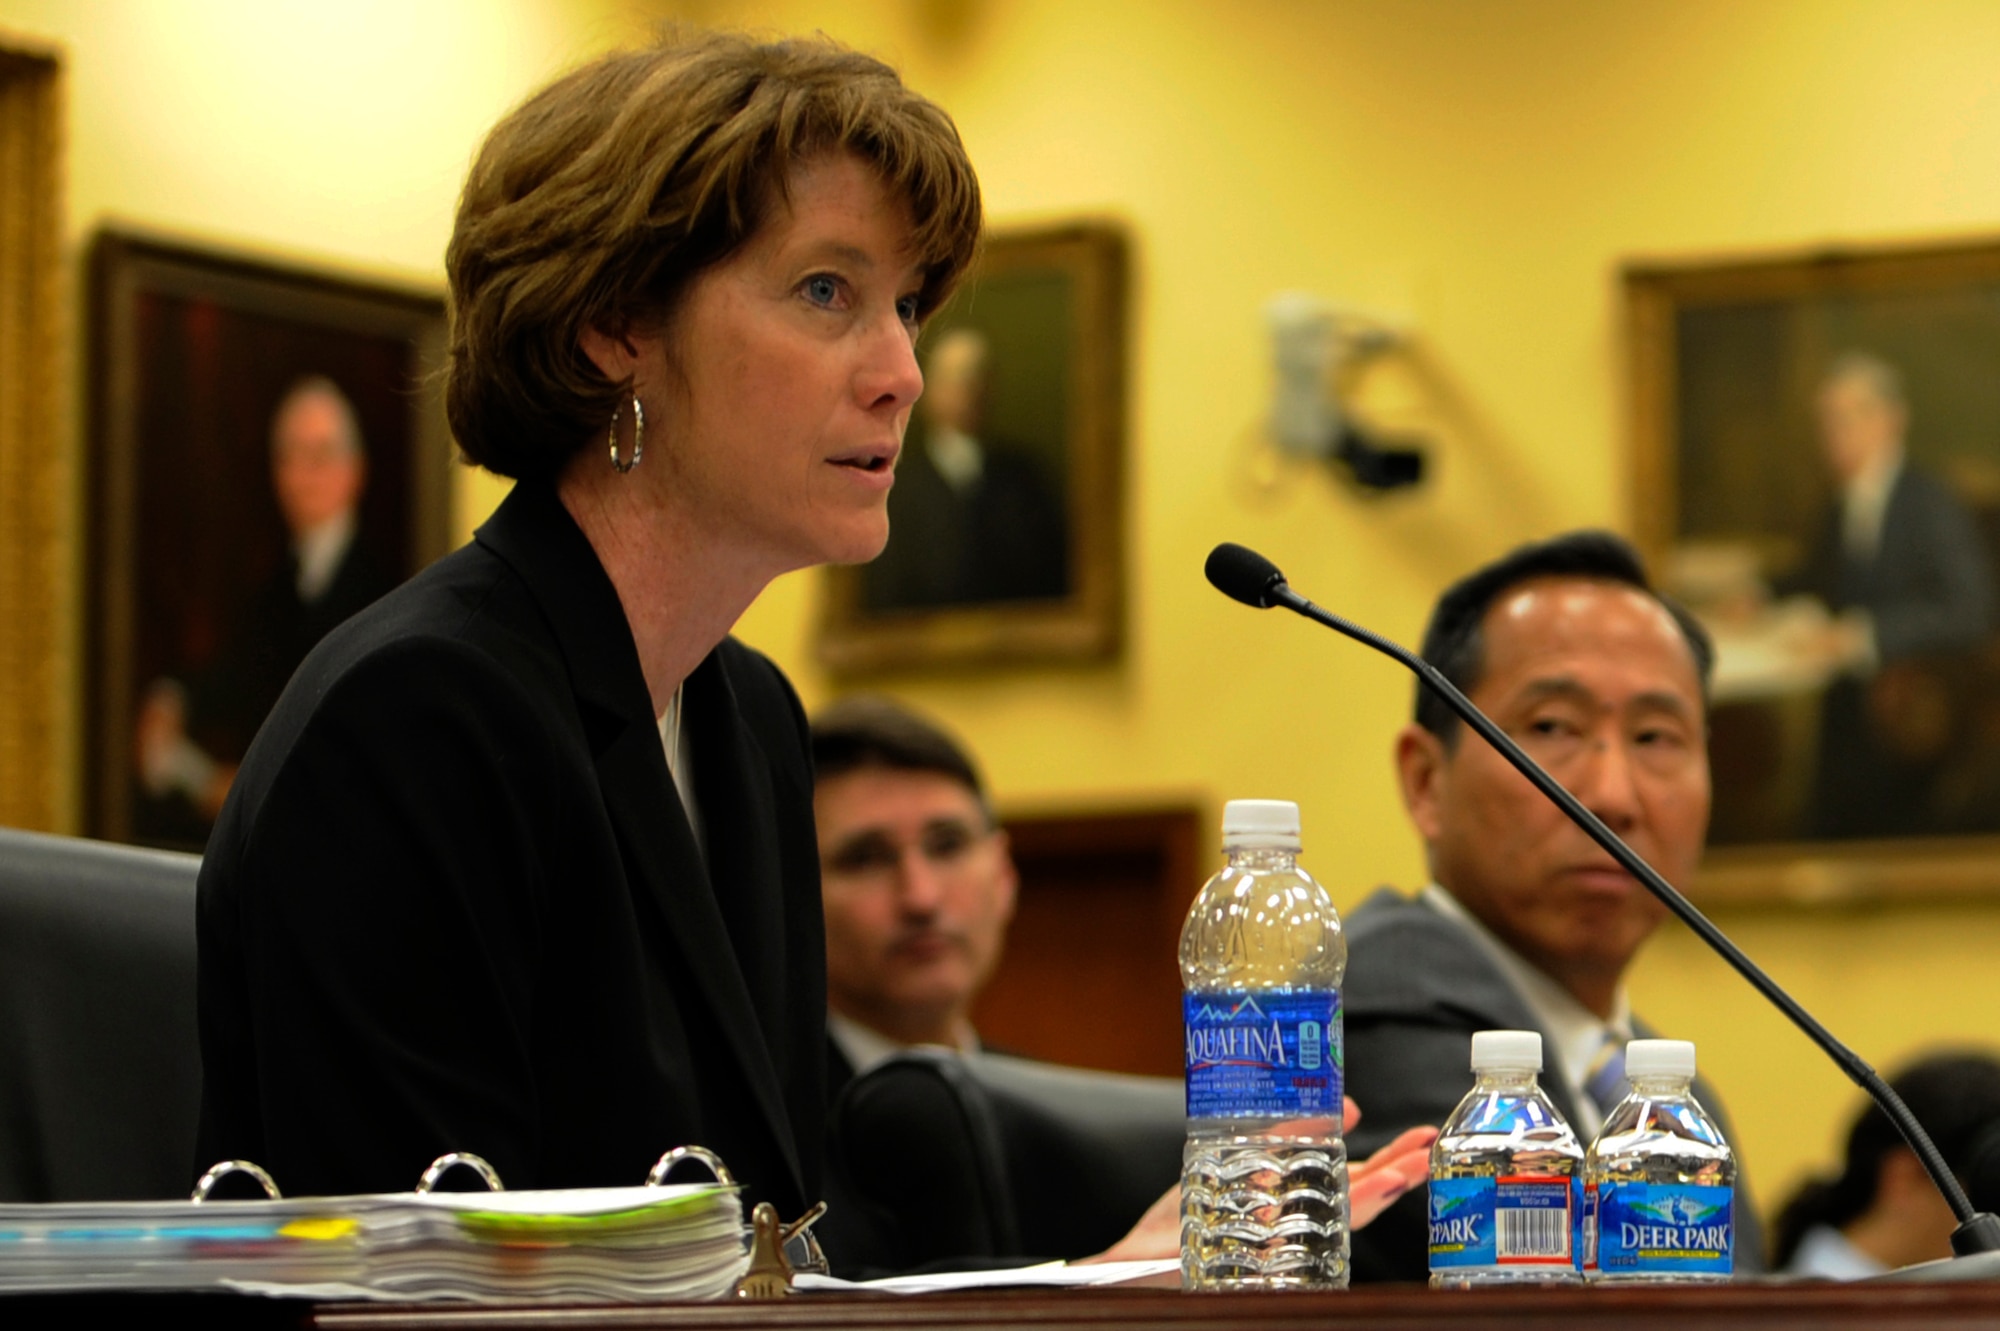 Ms. Kathleen Ferguson, Acting Assistant Secretary of the Air Force for installations, Environment and Logistics, testifies before the House Appropriations Subcommittee on Military Construction-Veteran Affairs, April 12, 2013. Ferguson’s statement included topics as military construction, military family housing, environmental, energy and base realignment and closure.  (U.S. Air Force photo by Senior Airman Carlin Leslie)